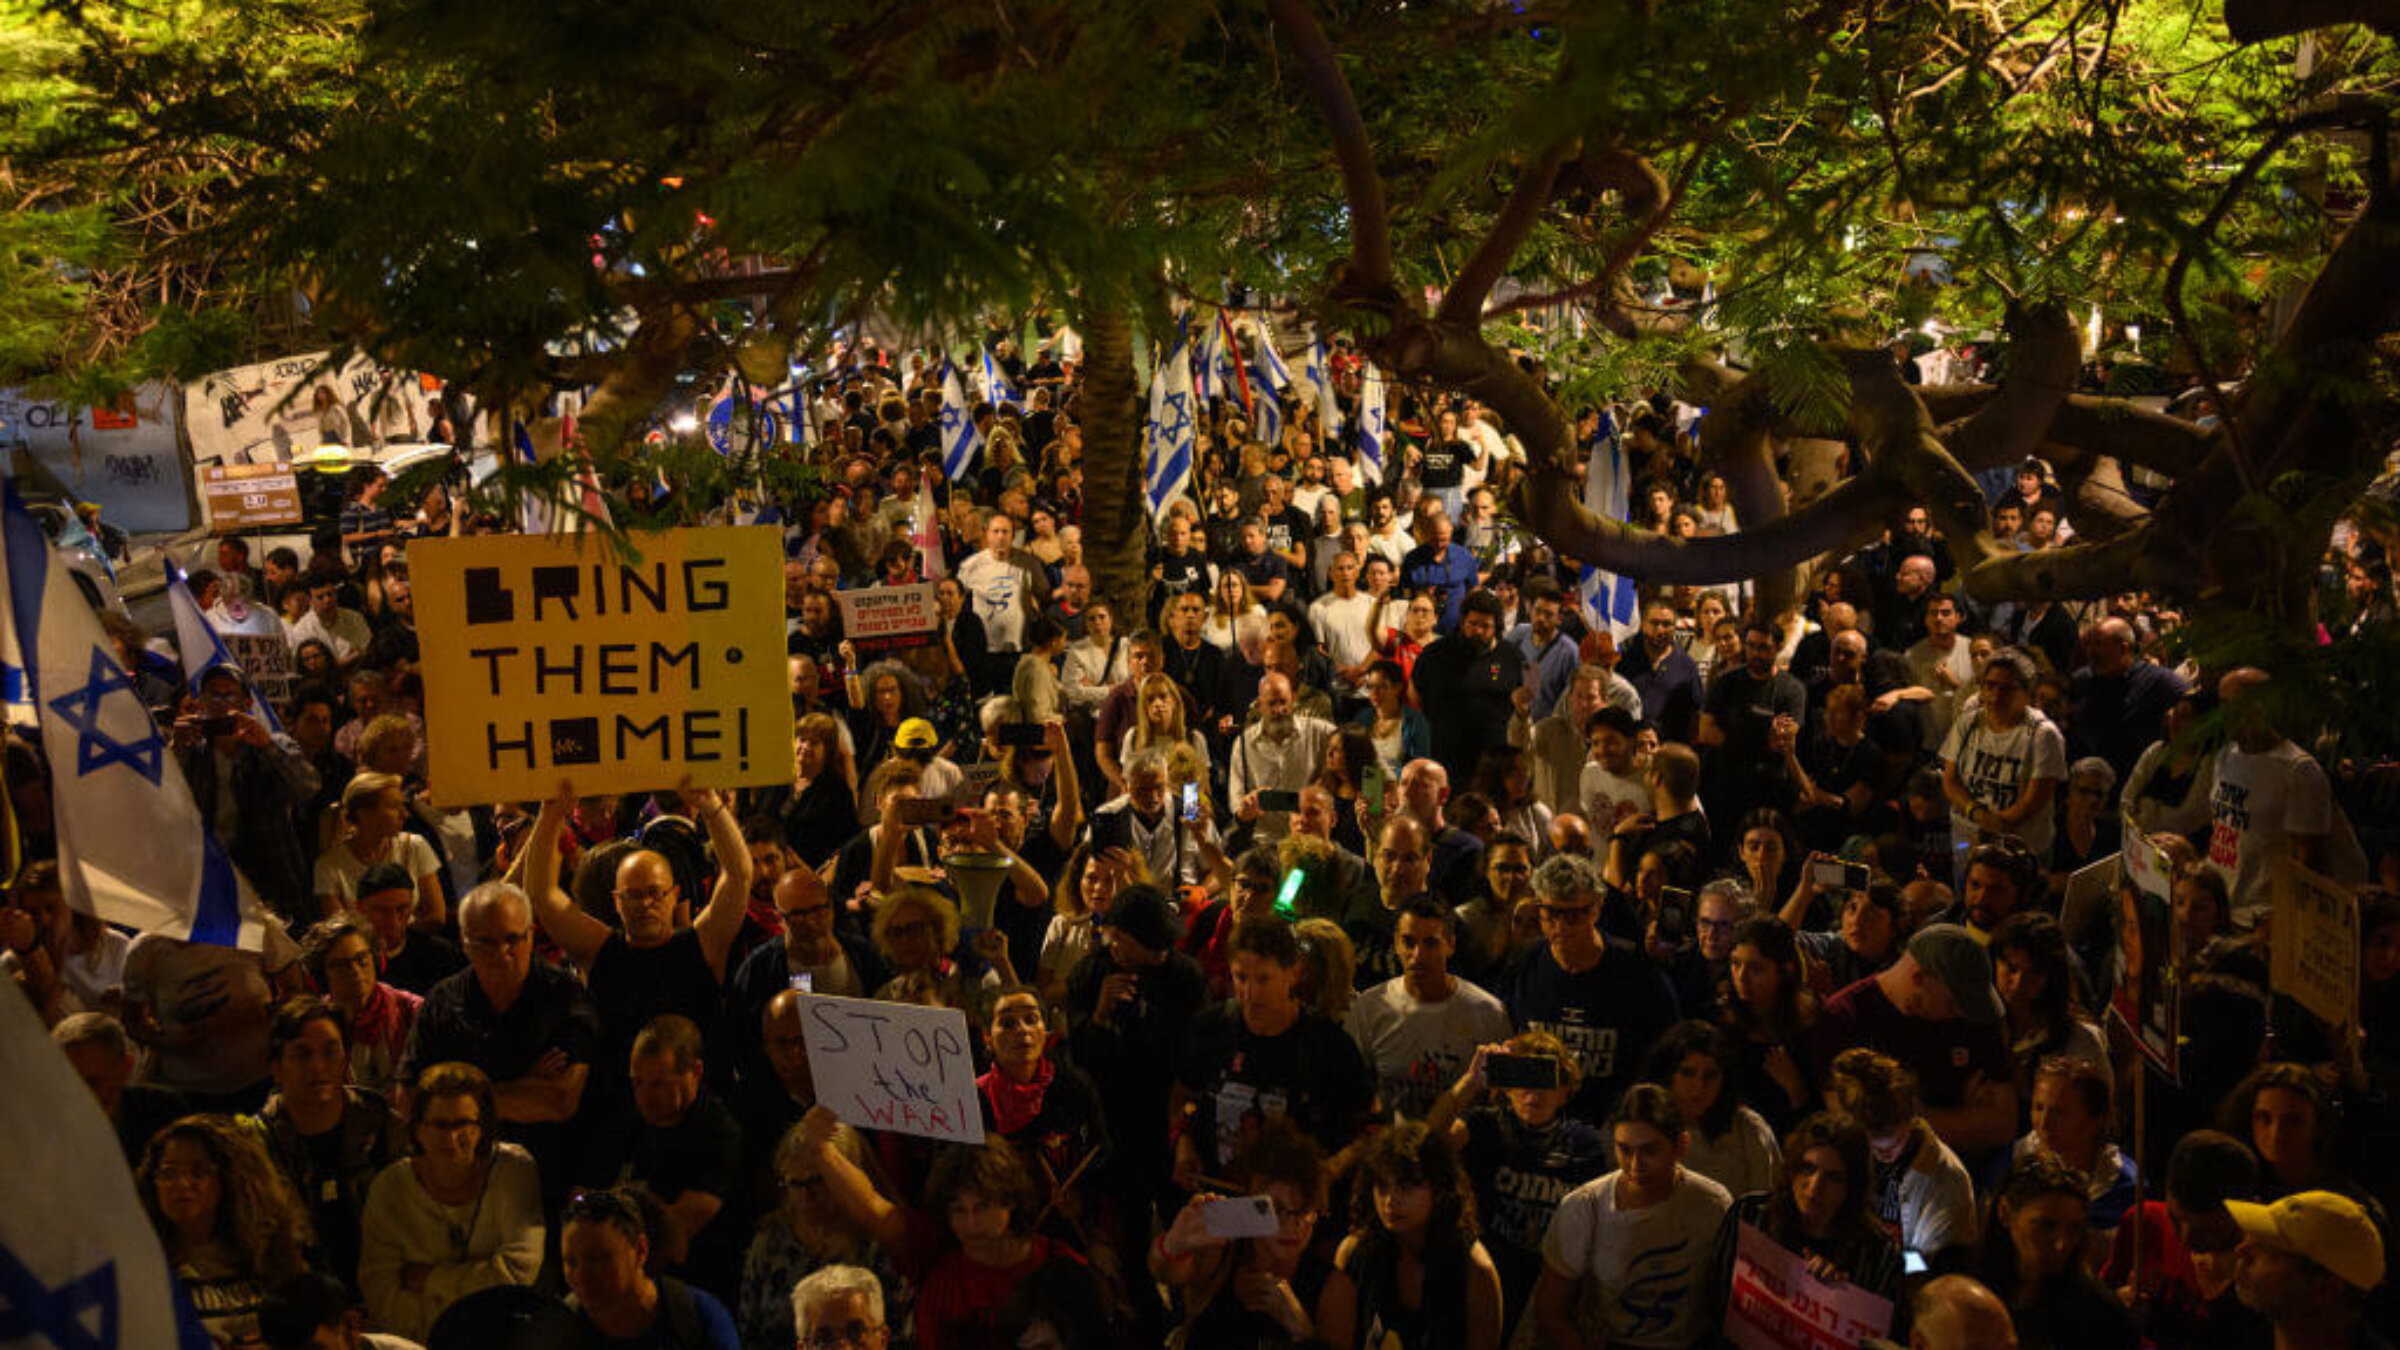 Protesters hear the Declaration of Independence being recited in Tel Aviv after a march calling for Prime Minister Benjamin Netanyahu's resignation. (Photo by Alexi J. Rosenfeld/Getty Images)